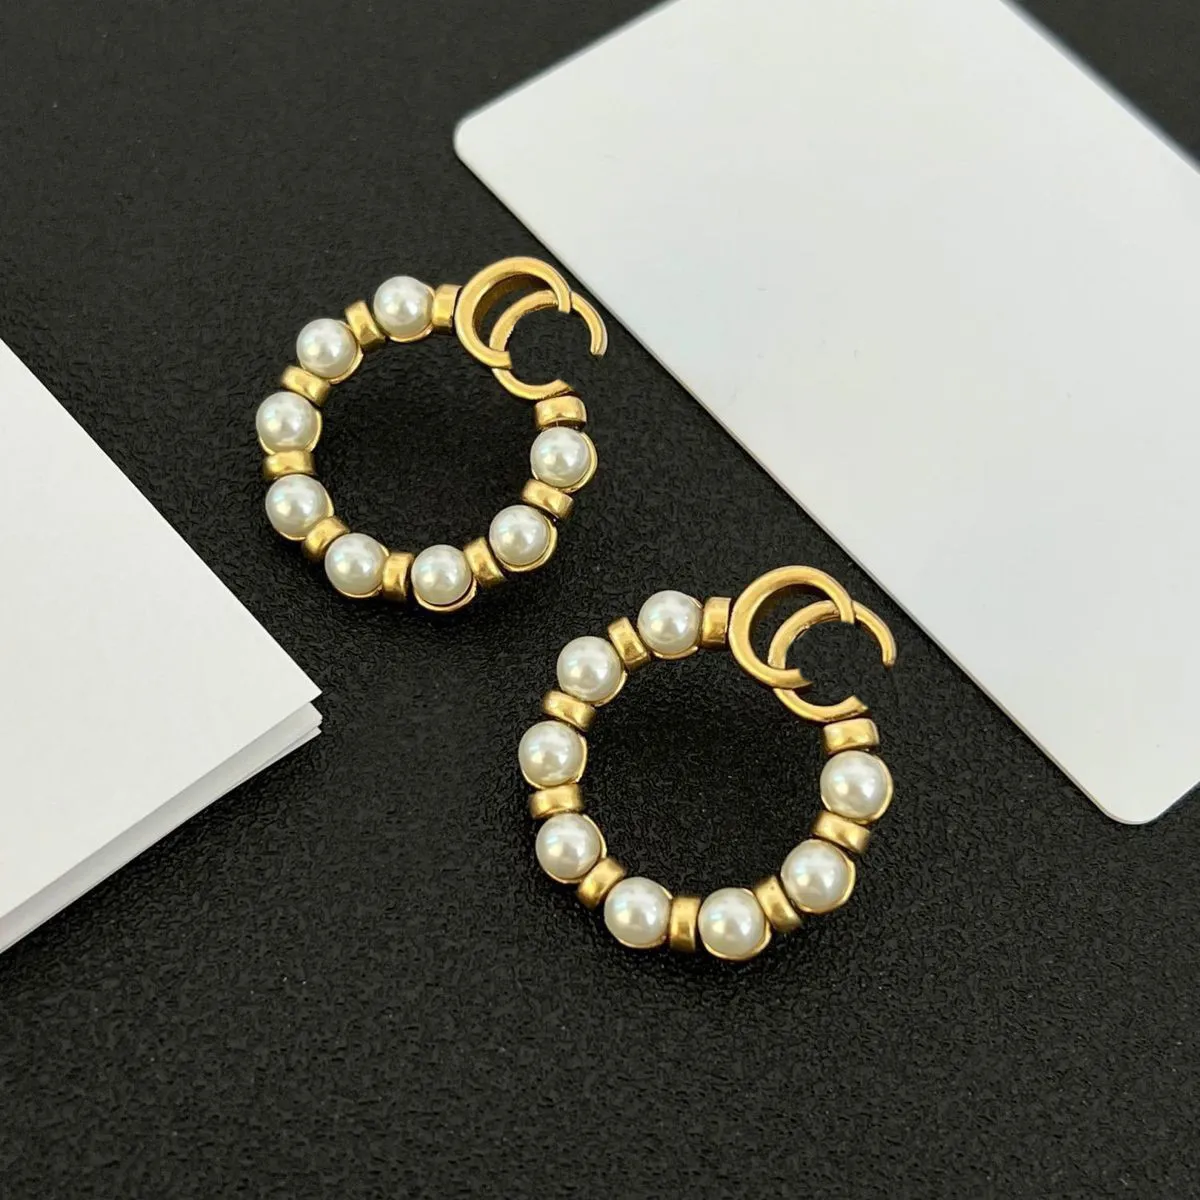 Famous Designer Earring Brand Letter Ear Stud Women Pearl Round Earrings for Wedding Party Gift Jewelry Accessories High Quality 20Style